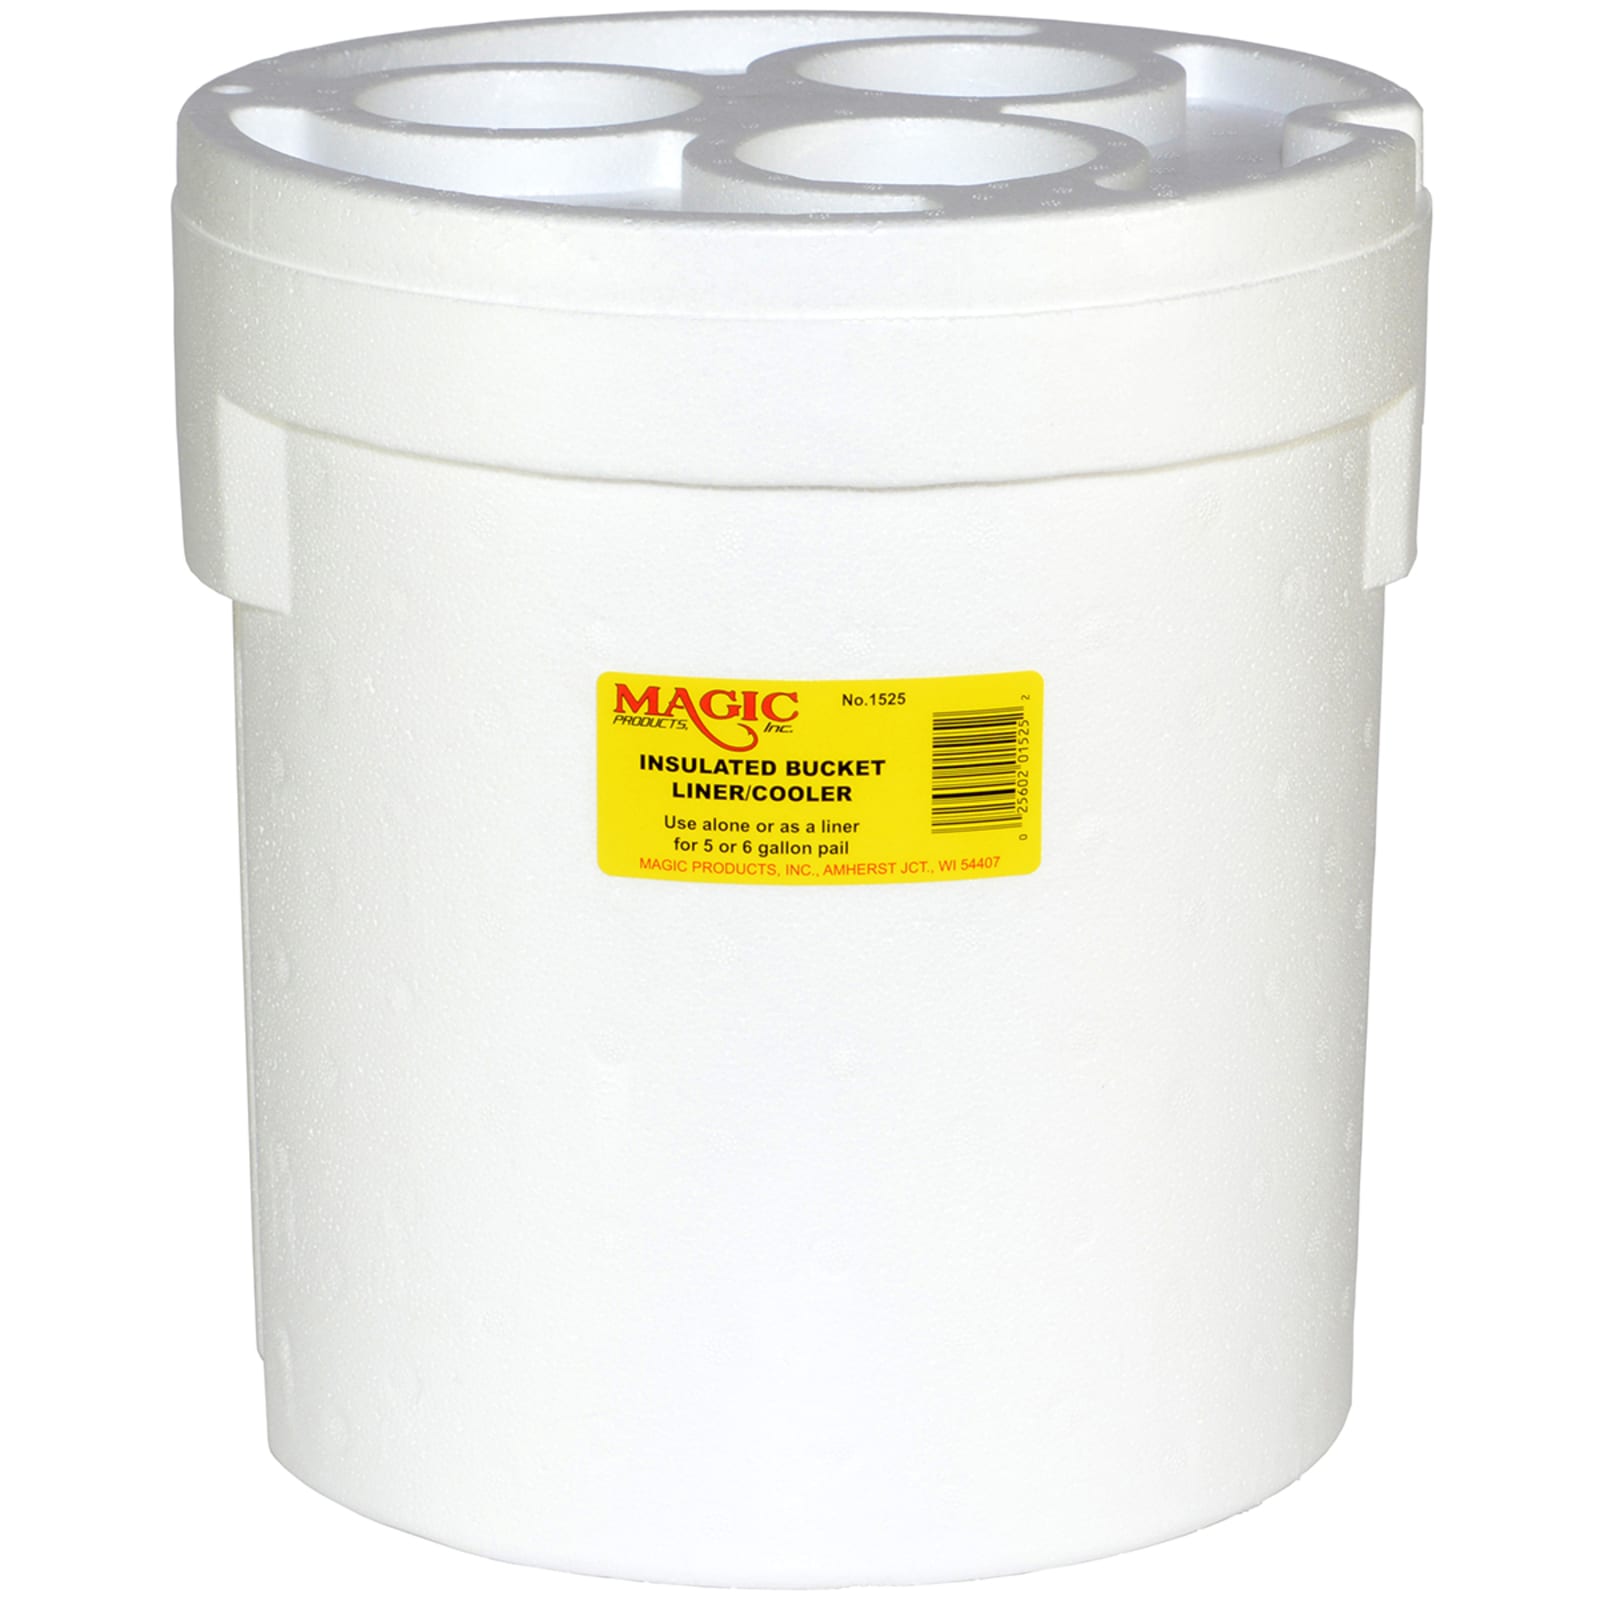 Bucket with Liner/Cooler by Magic at Fleet Farm